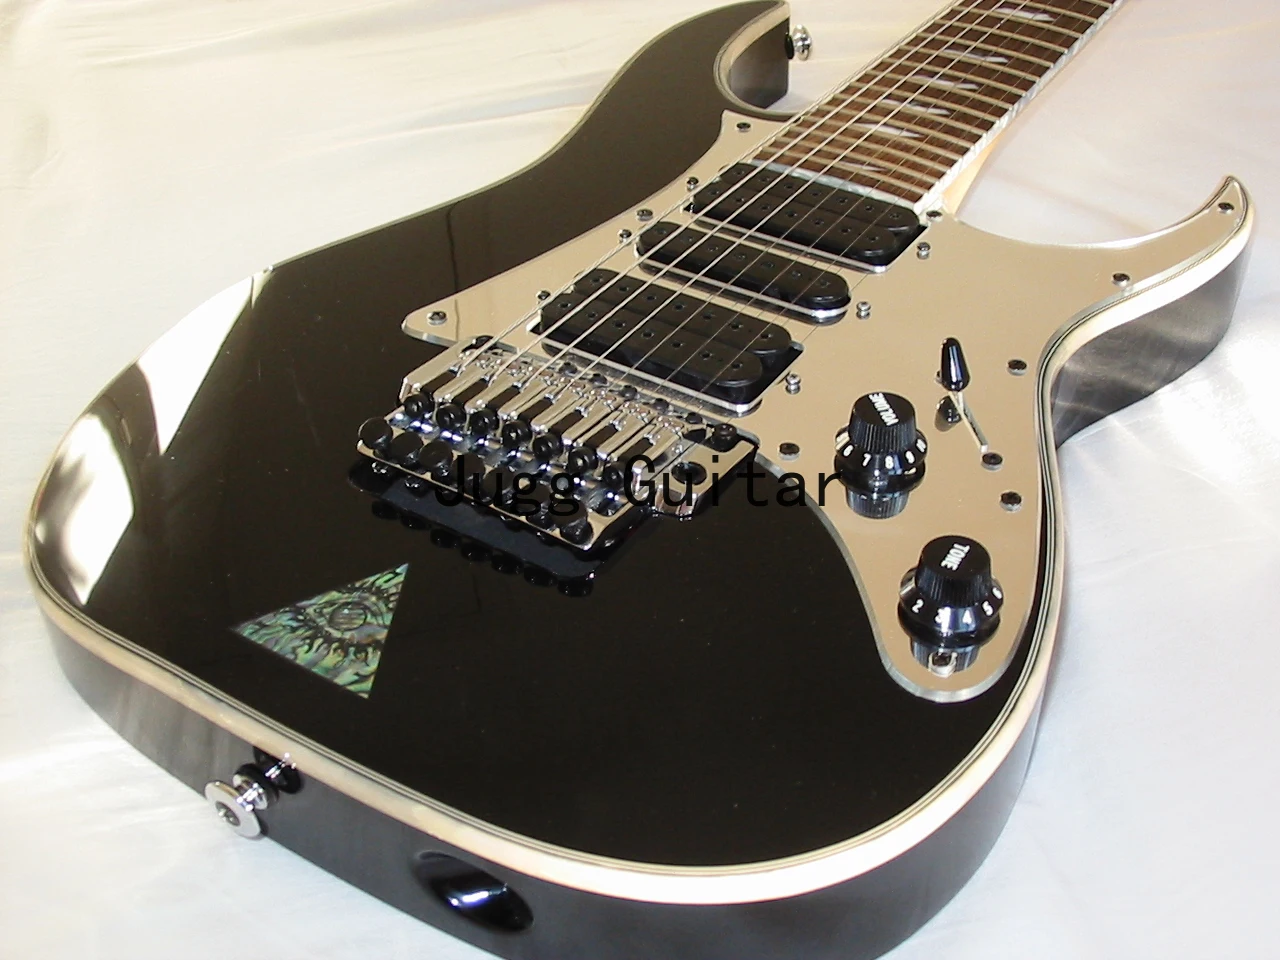 

UV777 Universe Steve Black 7 String Electric Guitar Mirror Pickguard, Floyd Rose Tremolo, Abalone Disappearing Pyramid Inlay